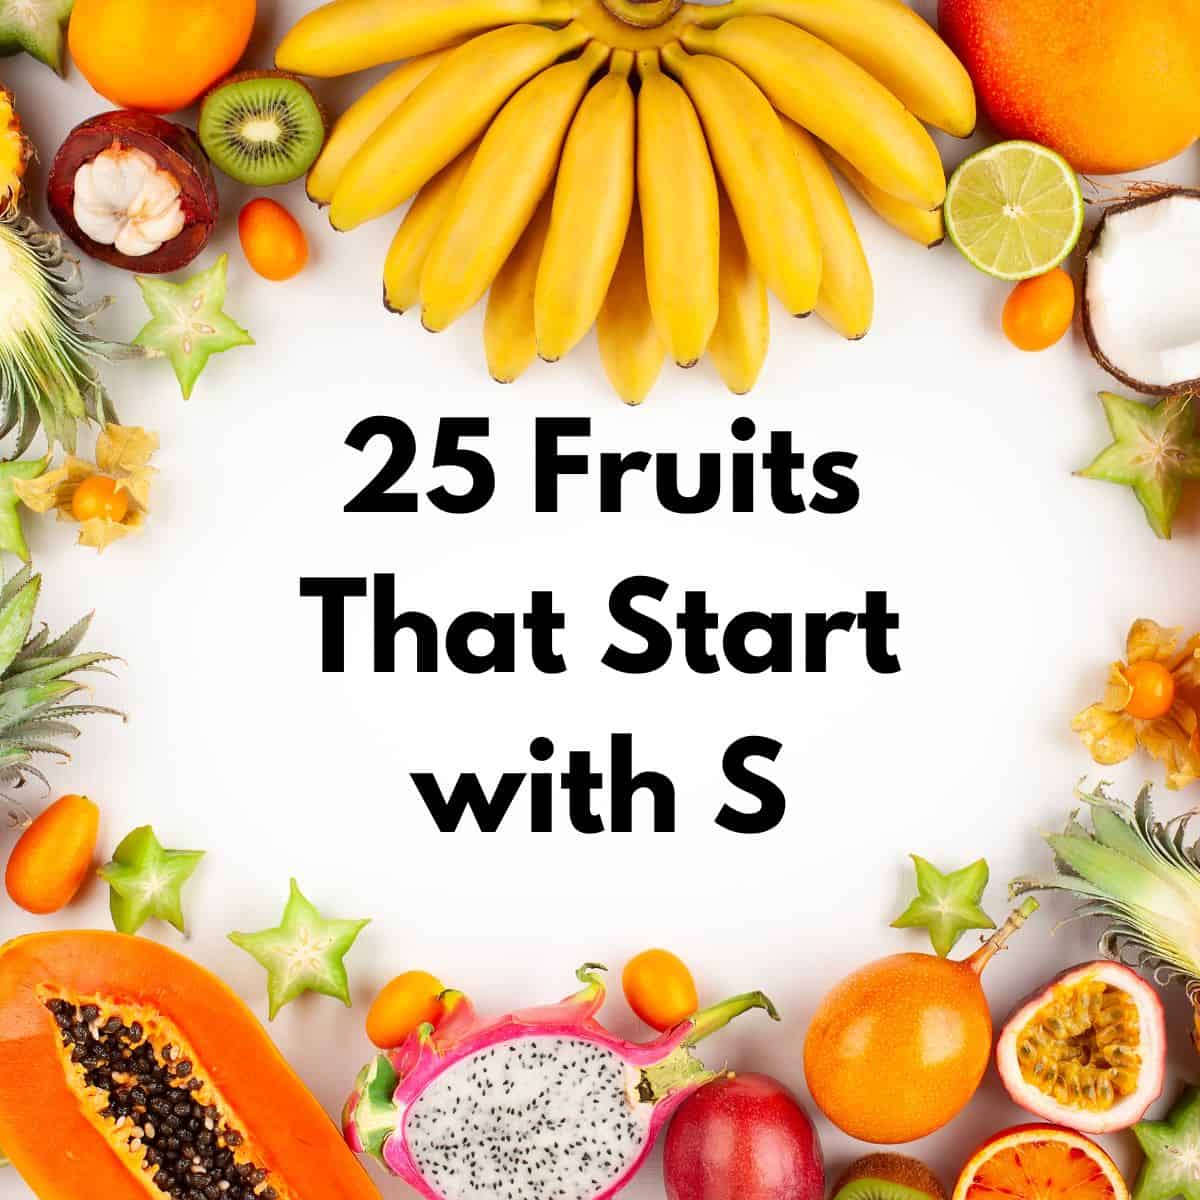 Exotic fruits surrounding title "25 fruits that start with S."